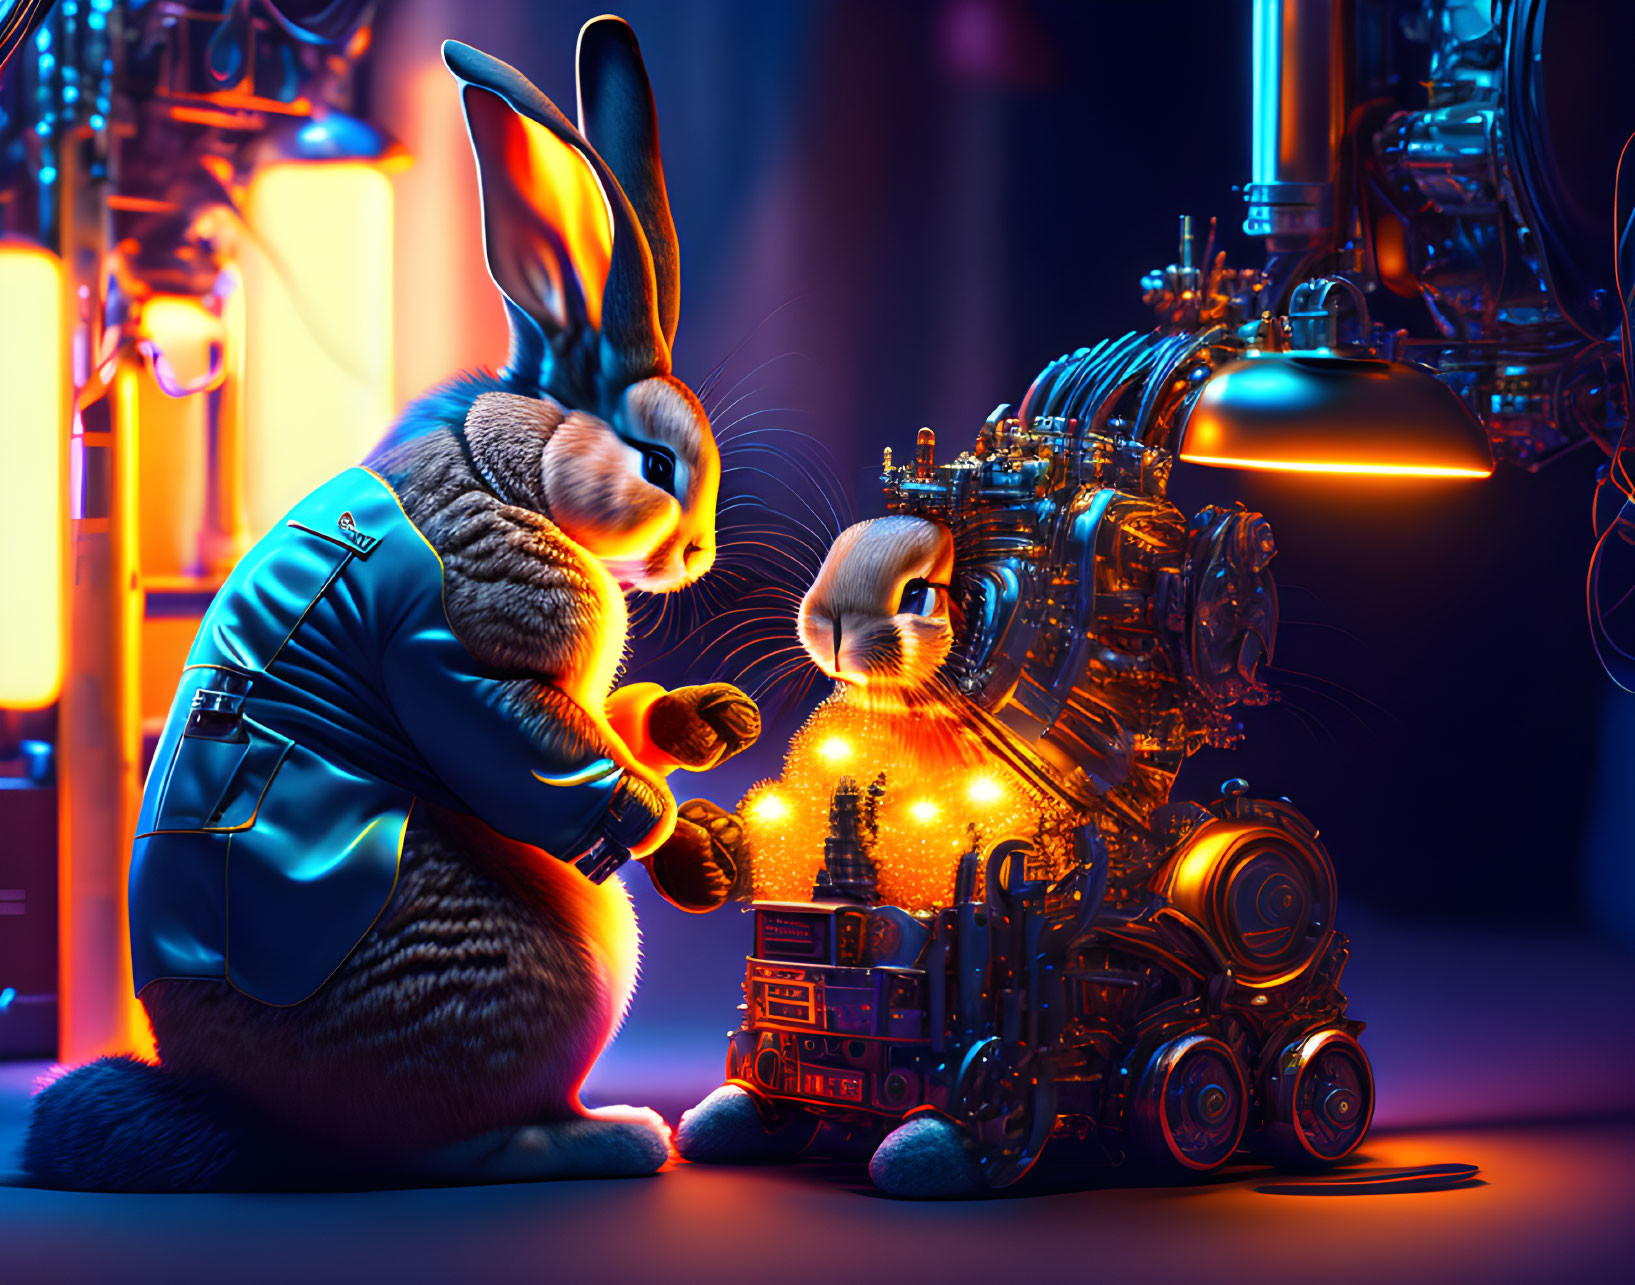 Anthropomorphic rabbit in blue jacket tinkering with glowing machine in dimly lit setting